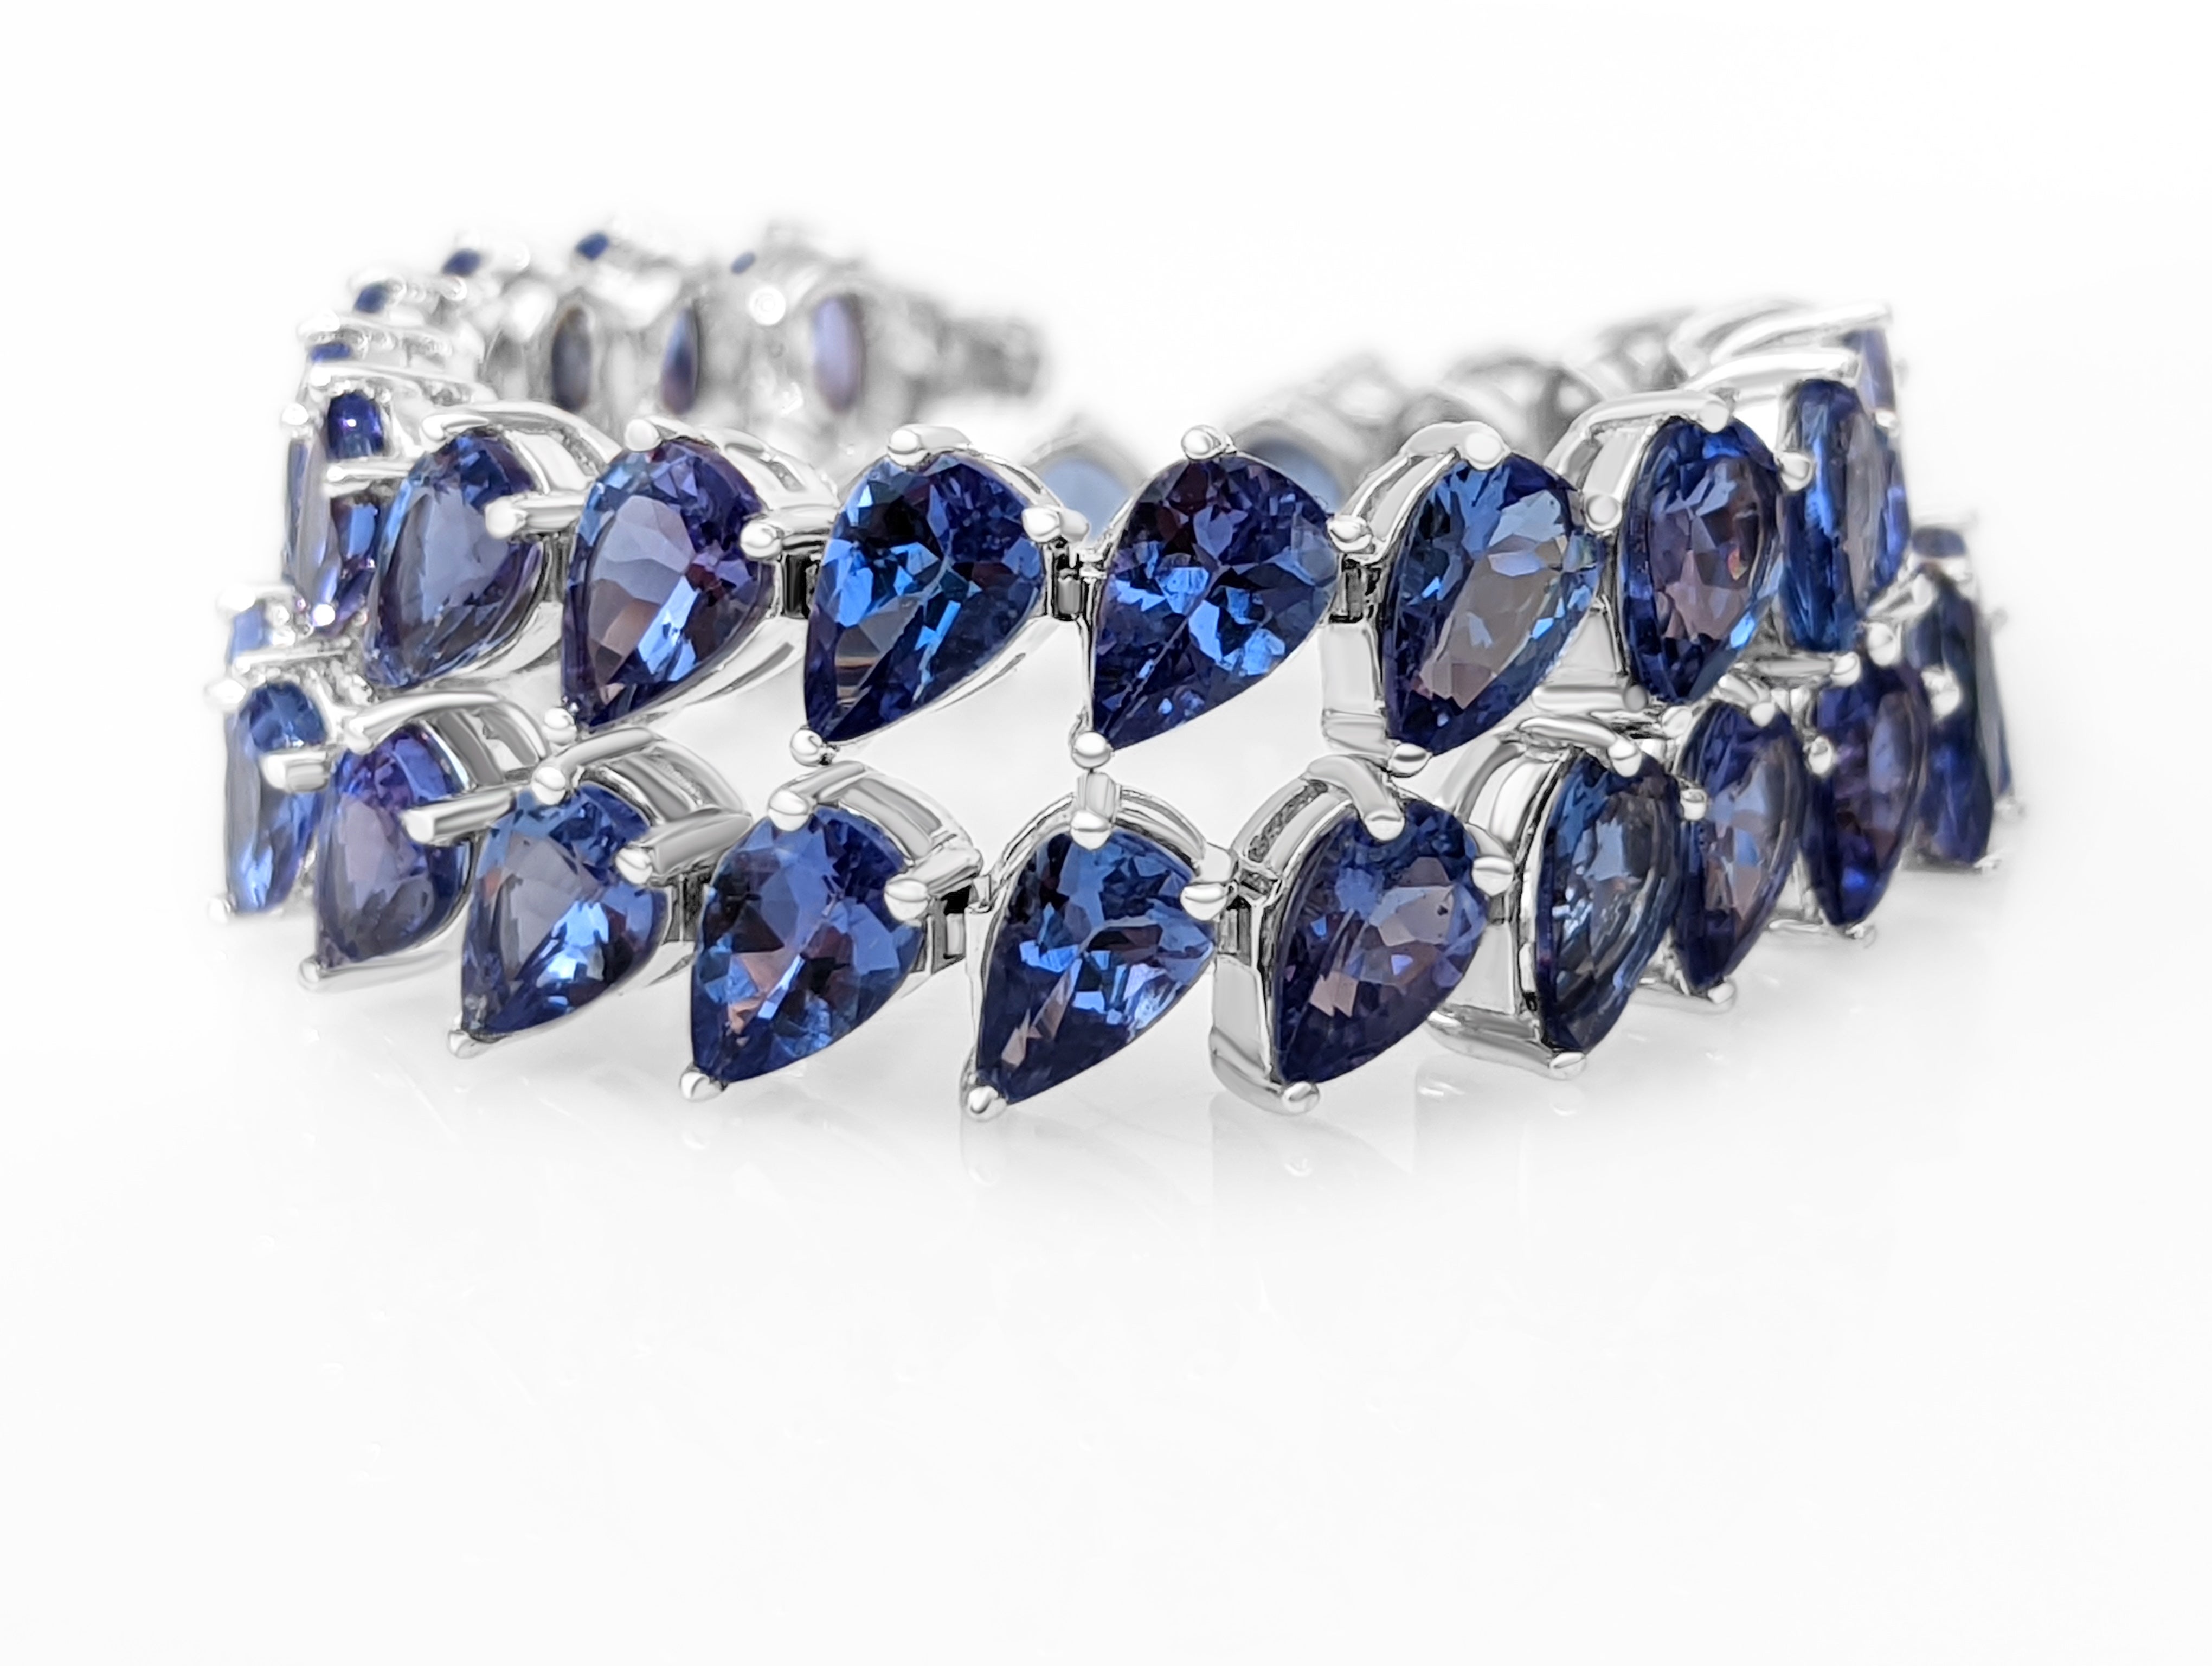 A truly one of a kind natural Tanzanite bracelet, set with 39 pear shape stones of 14.56 total carat weight!
The bracelet will stand out in any occasion and is a wonderful gift for yourself or your loved one.

Center Natural Tanzanite:
Weight: 14.56